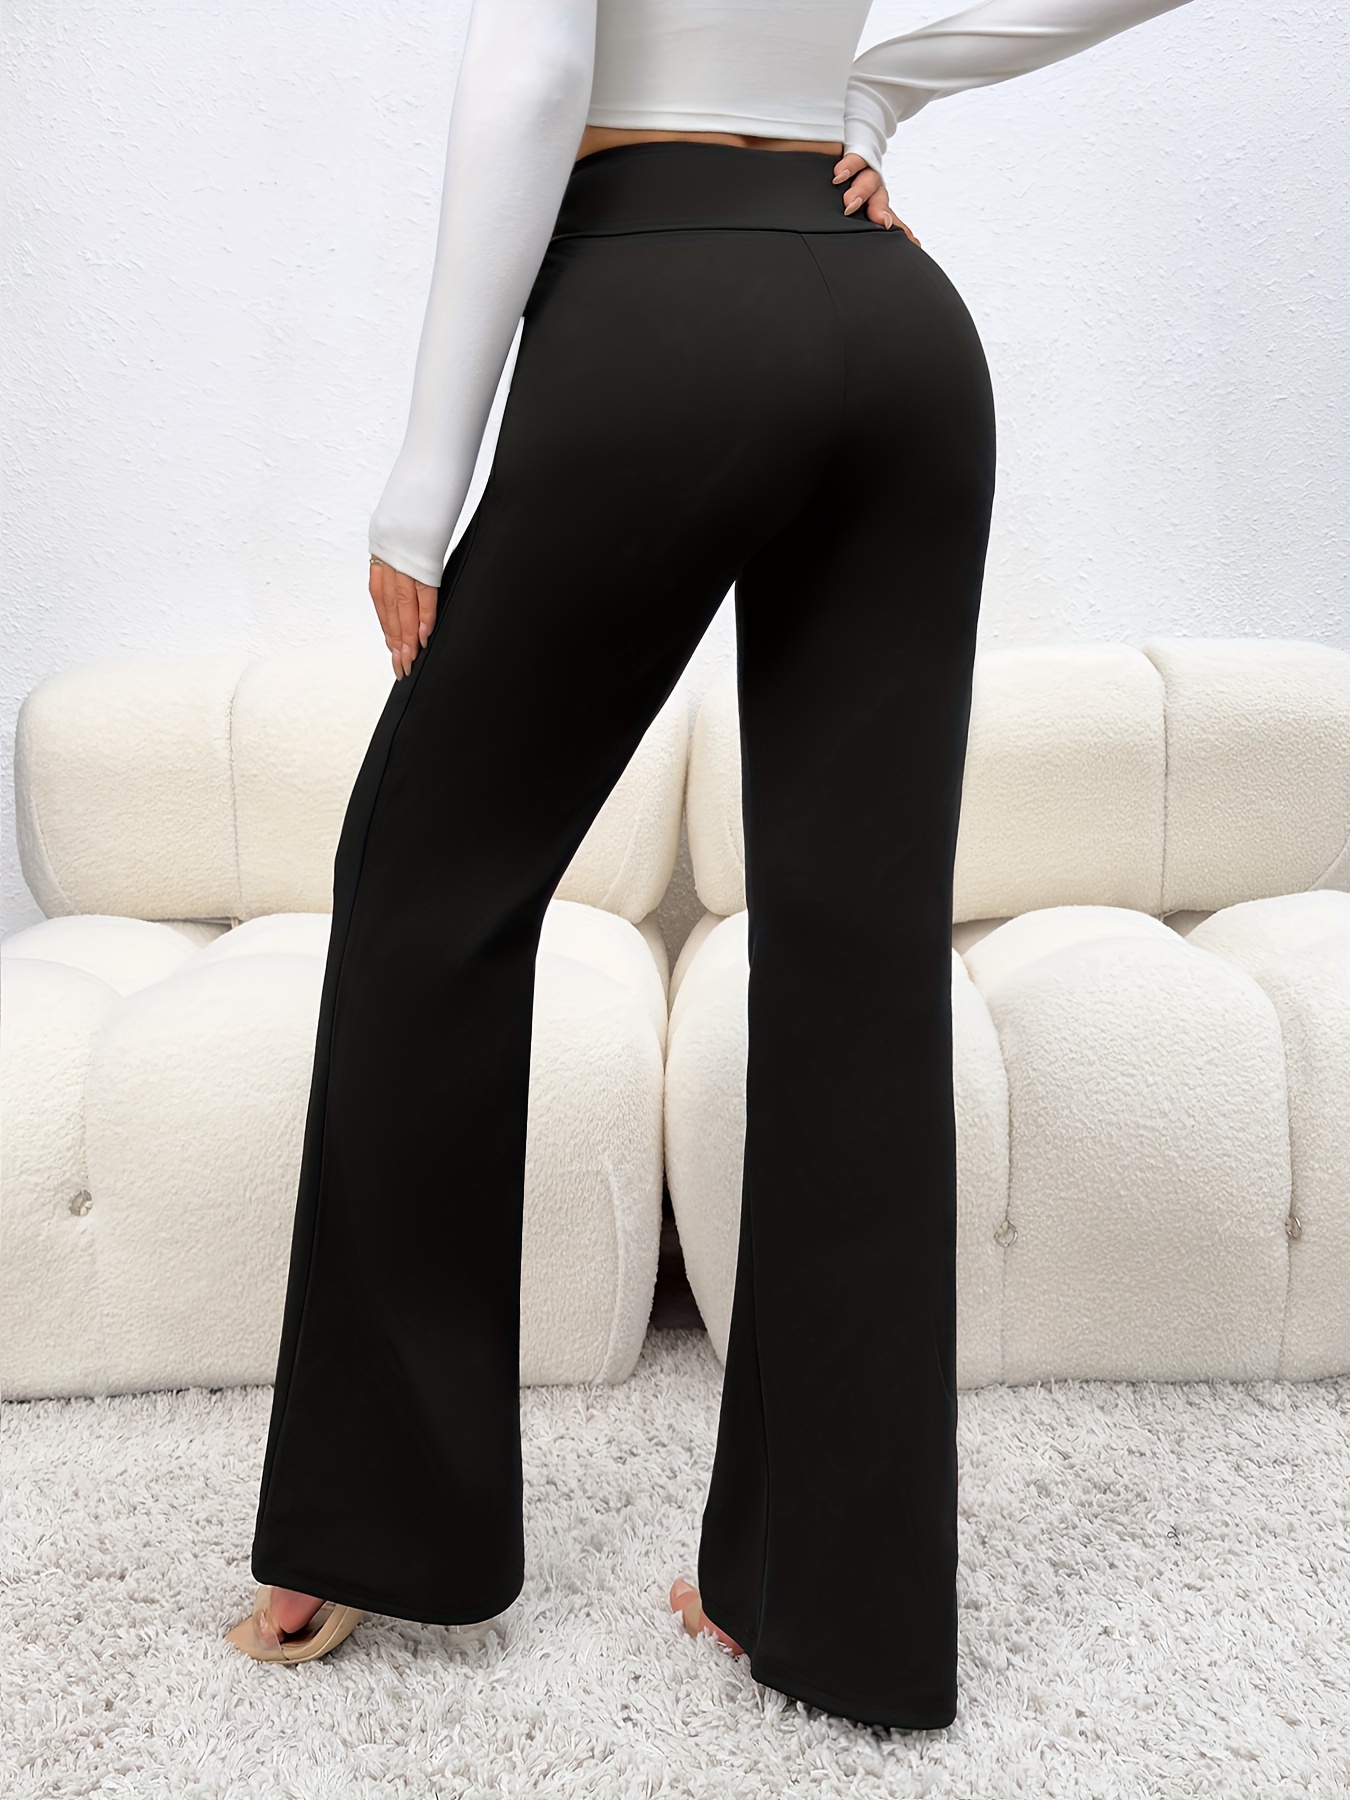 Solid Color Flare Leg Pants, Casual High Waist Forbidden Pants, Women's  Clothing